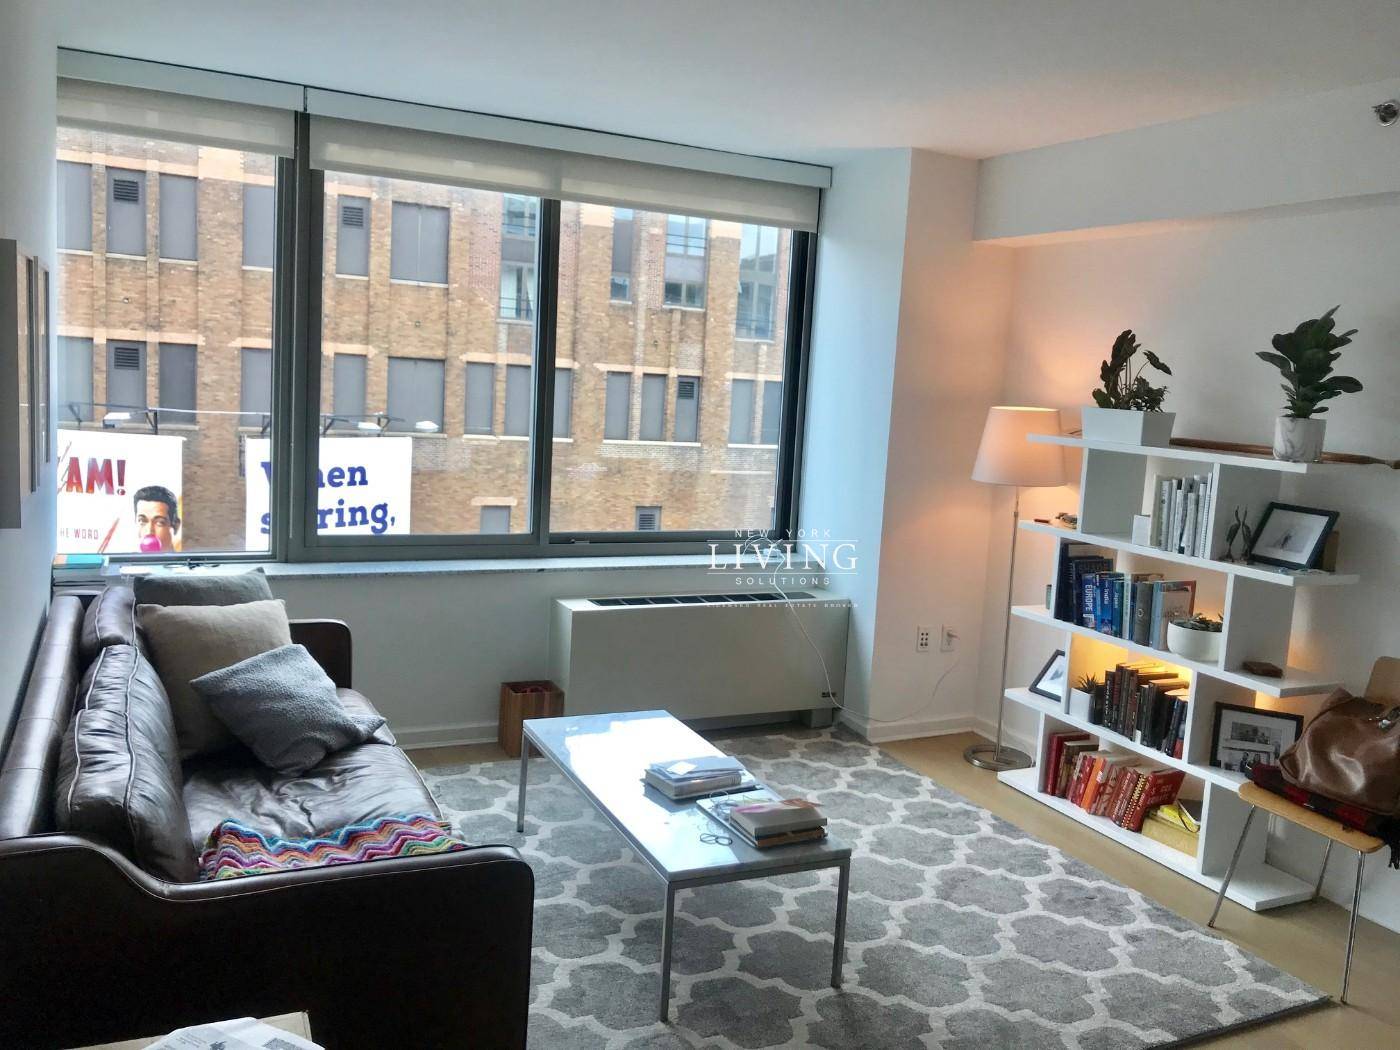 Spacious one bedroom one bath plus dining alcove apartment facing South featuring partial river views in the heart of Chelsea, steps from the Highline and Chelsea Water Park.